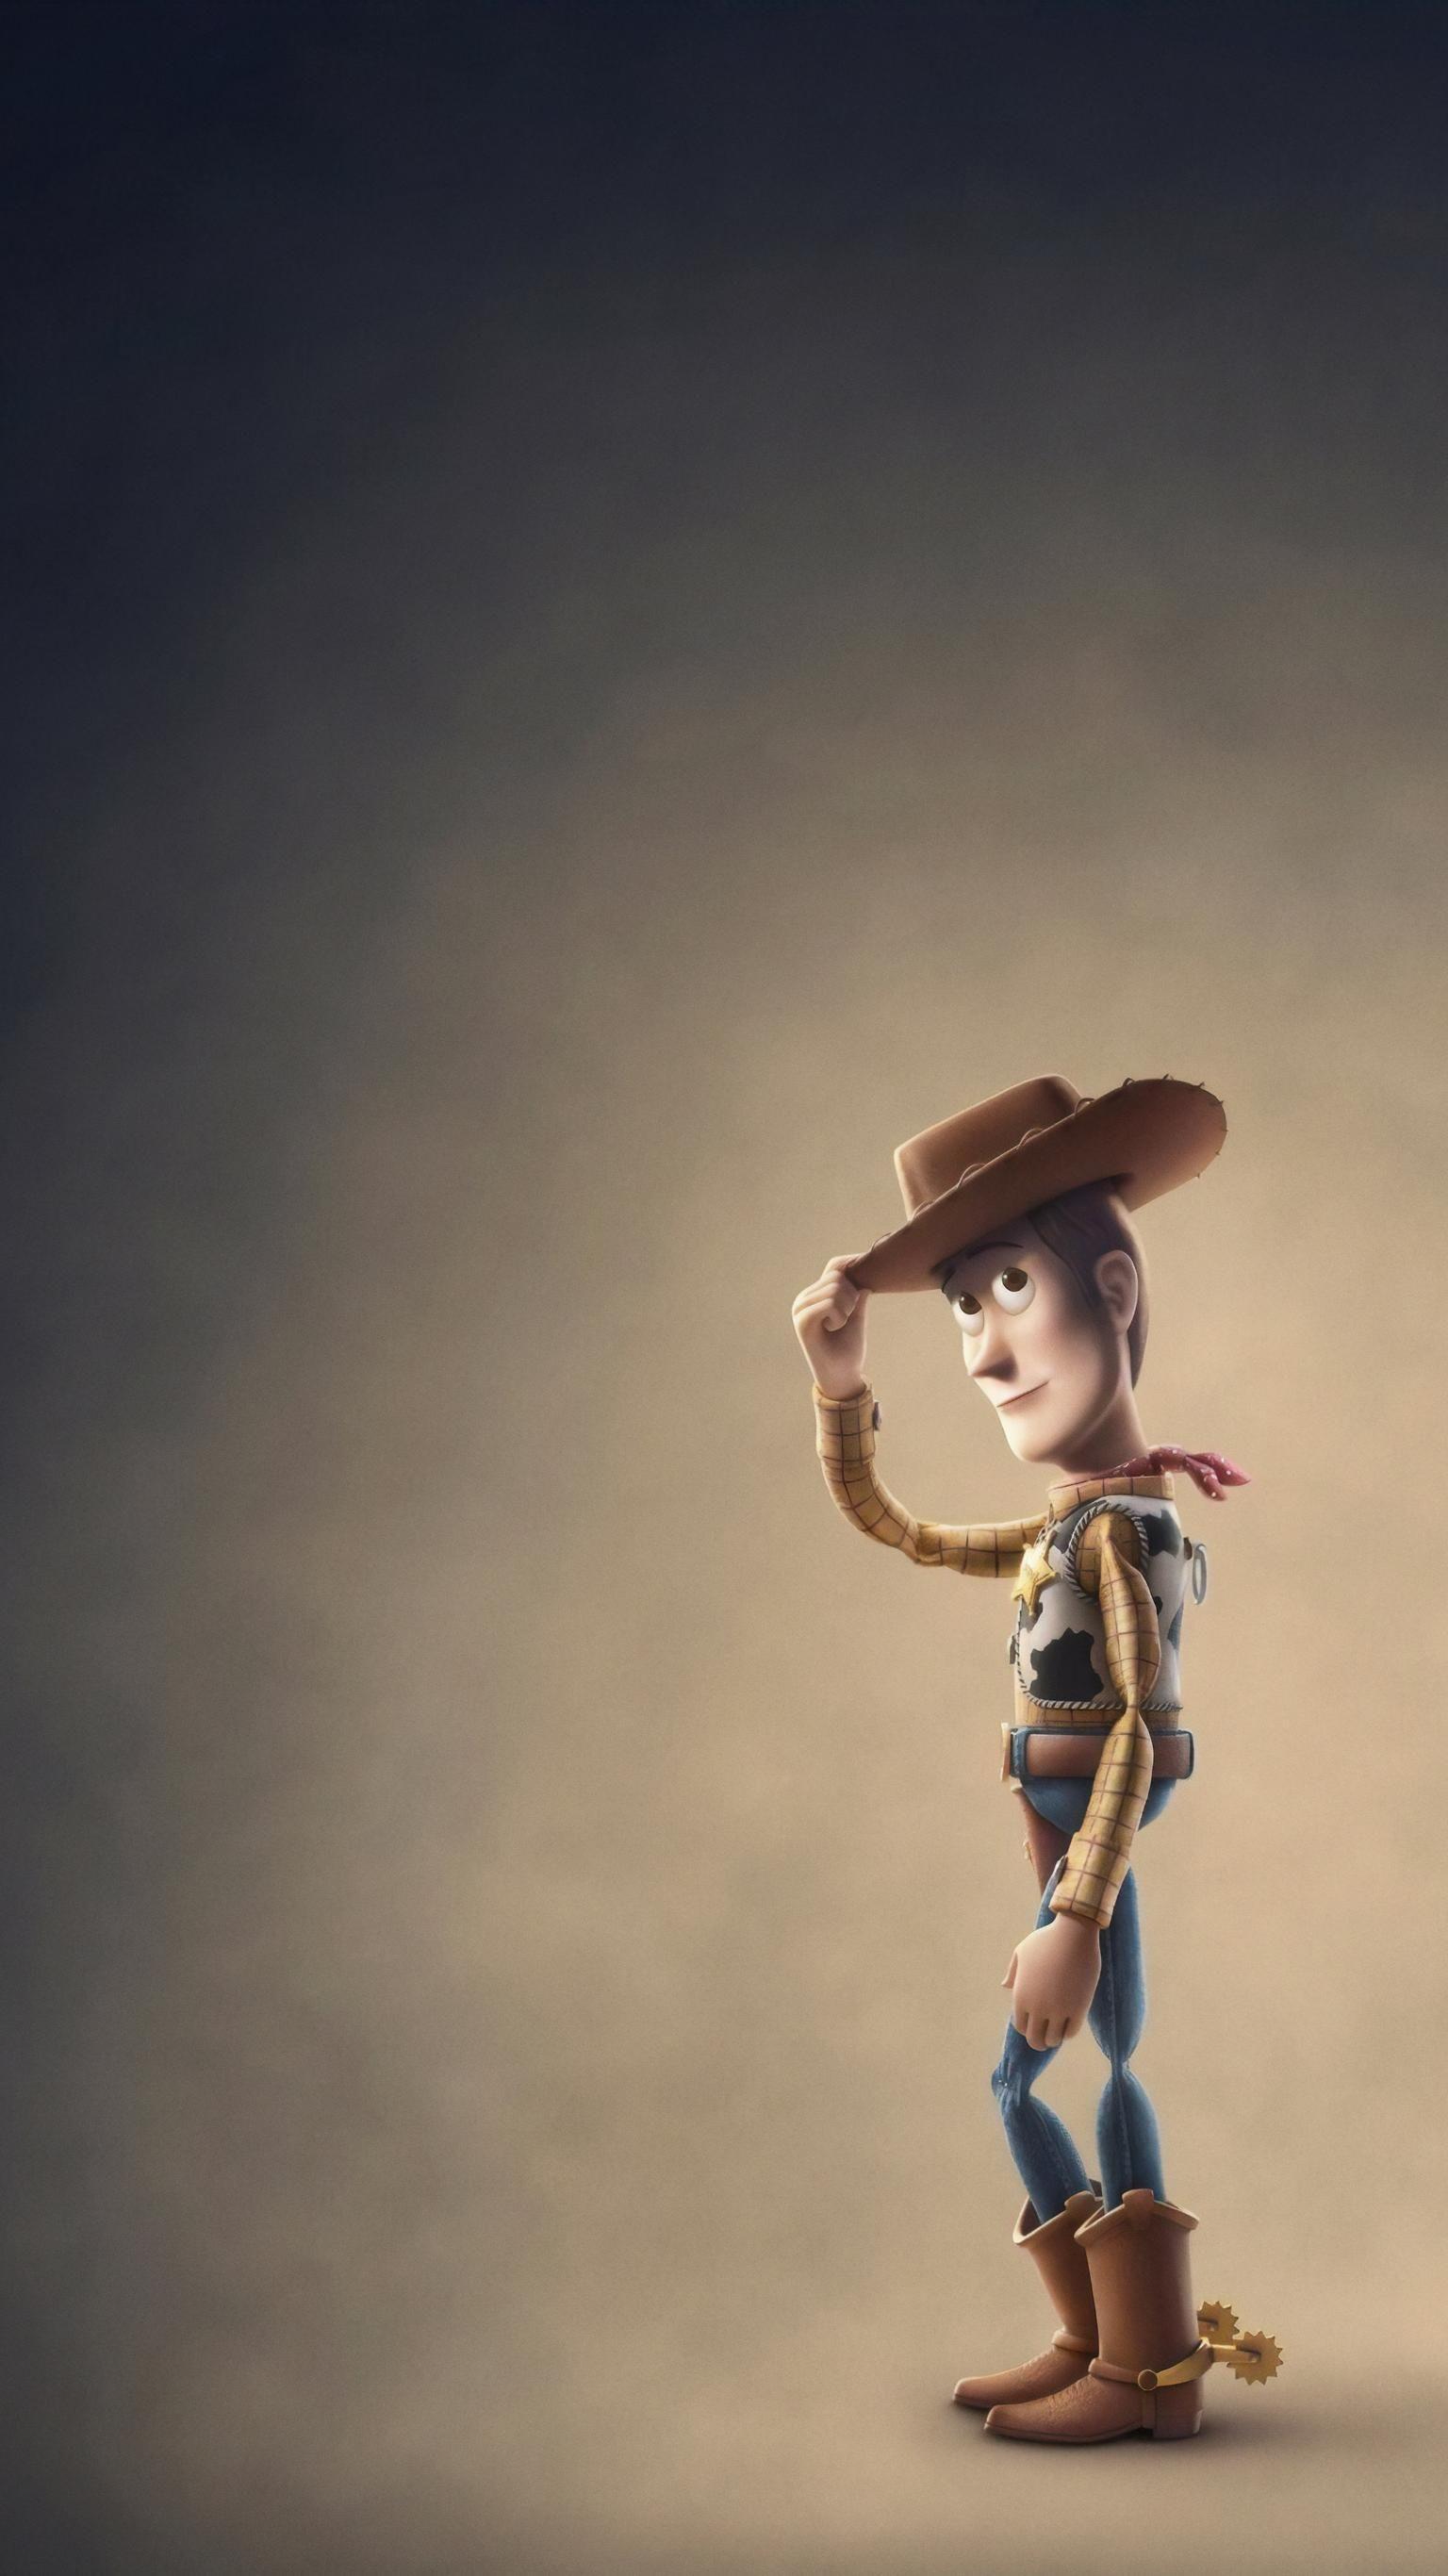 Toy Story 4 (2019) Phone Wallpaper. Toy story, Disney